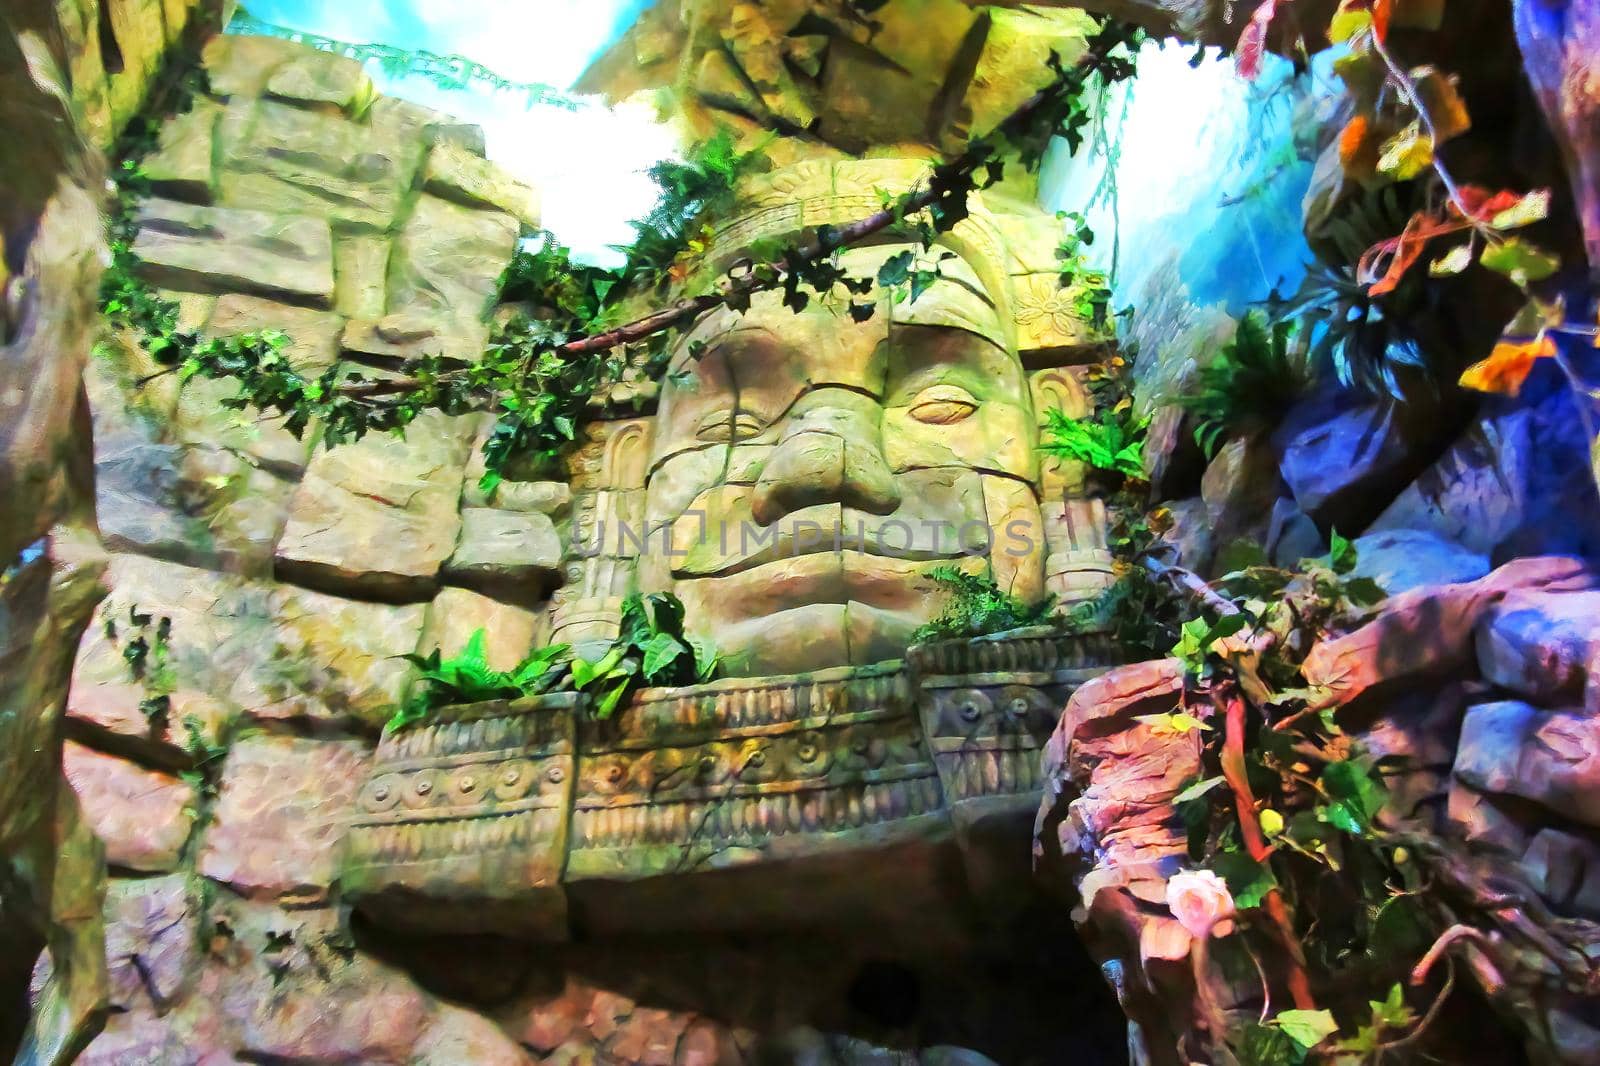 Olmec sculpture carved from stone. Mayan symbol - Big stone head statue in a jungle on image